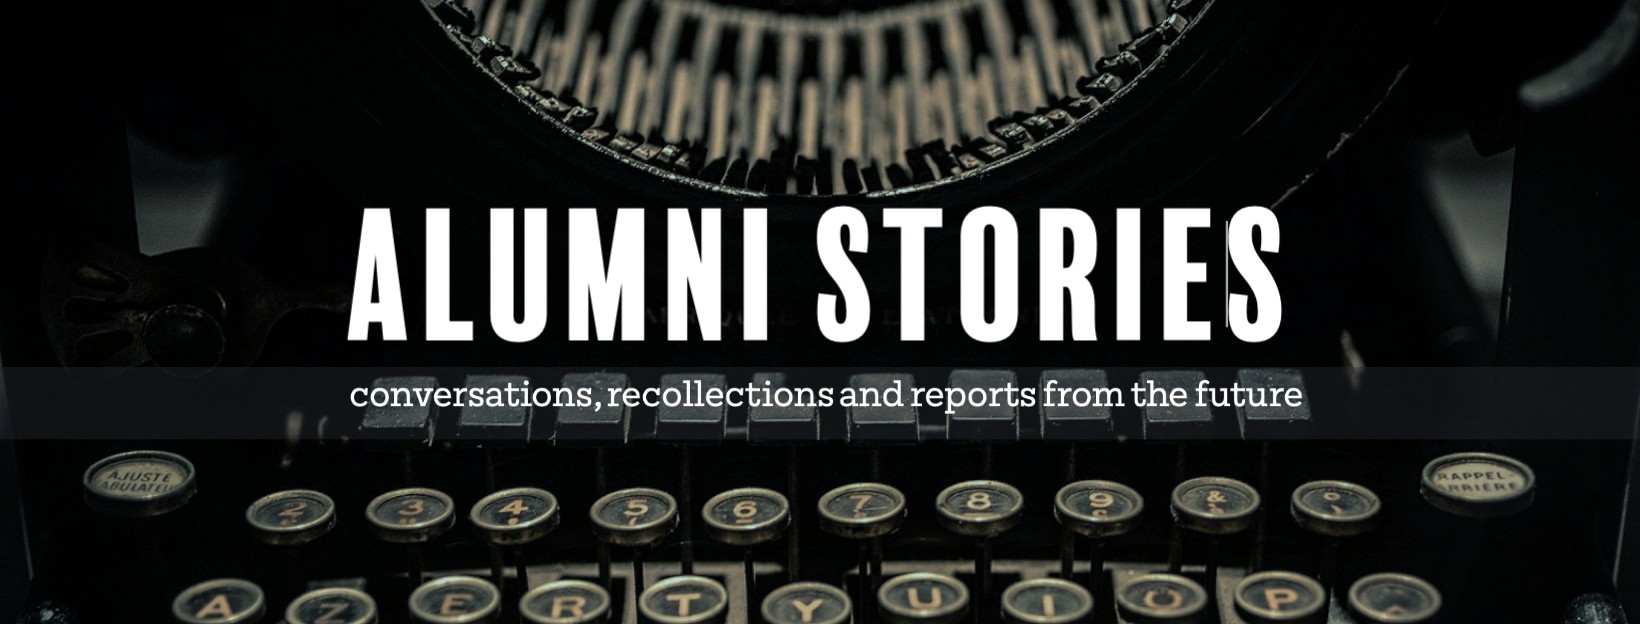 ALUMNI STORIES: conversations, recollections and reports from the future - title on watermark of old typewriter